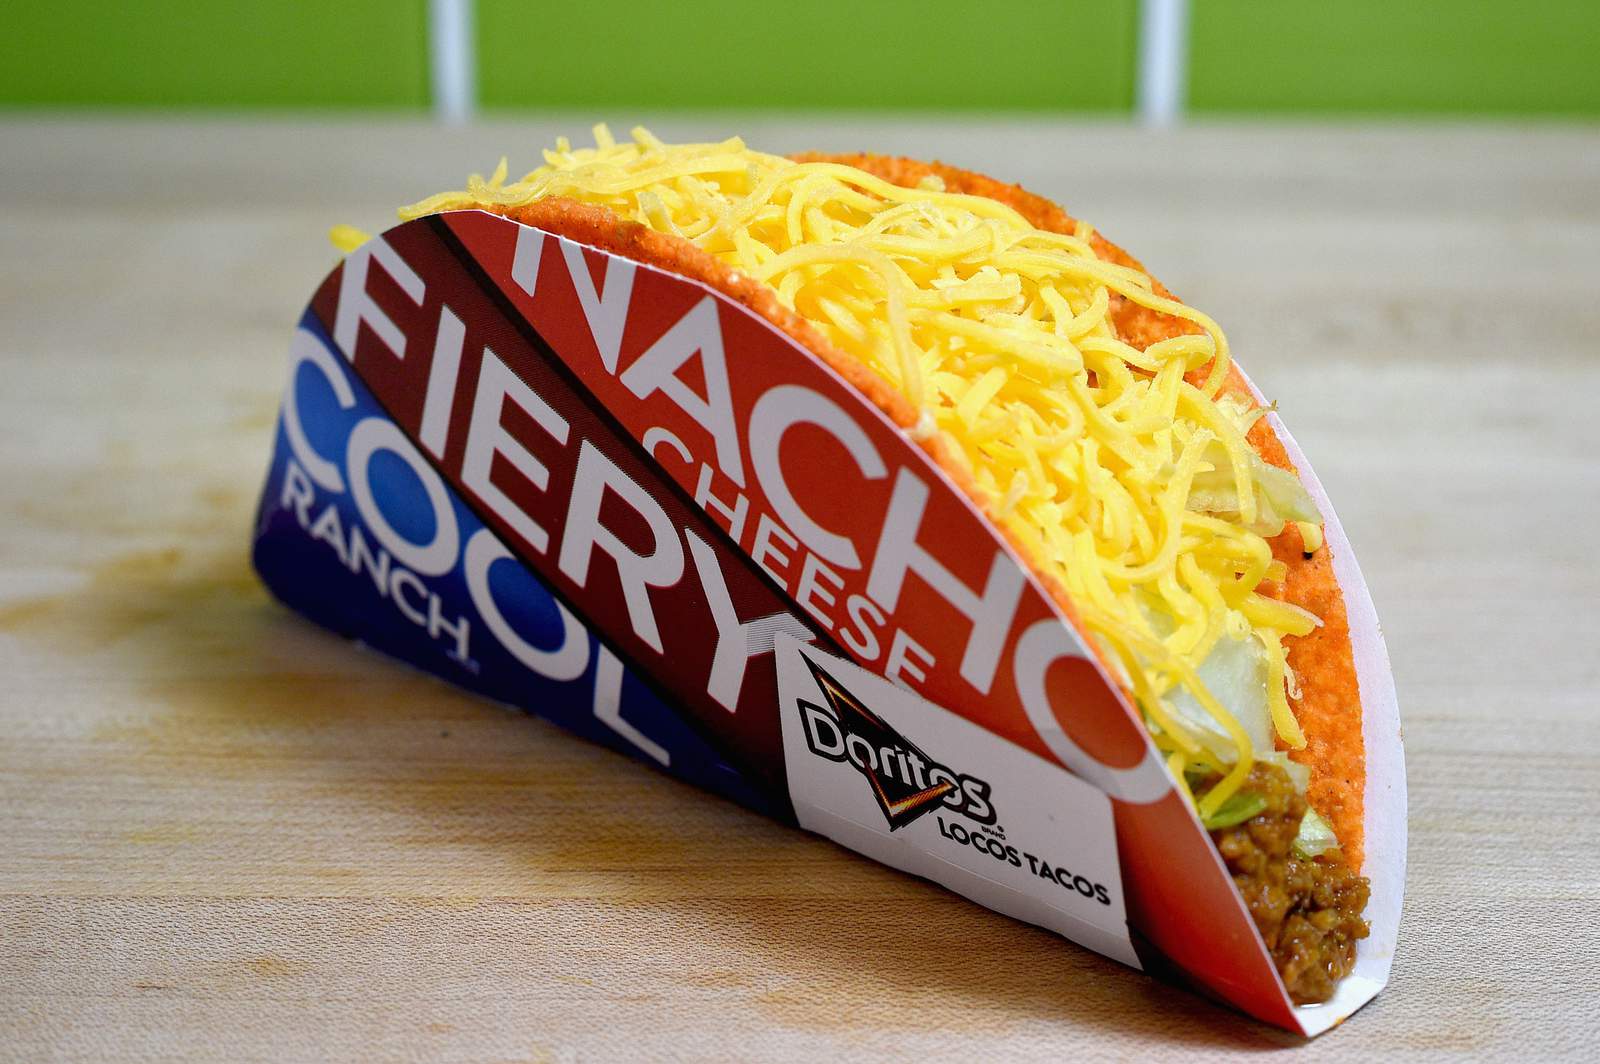 Taco 'bout drama! Free taco offer from Taco Bell is met with (some) resistance